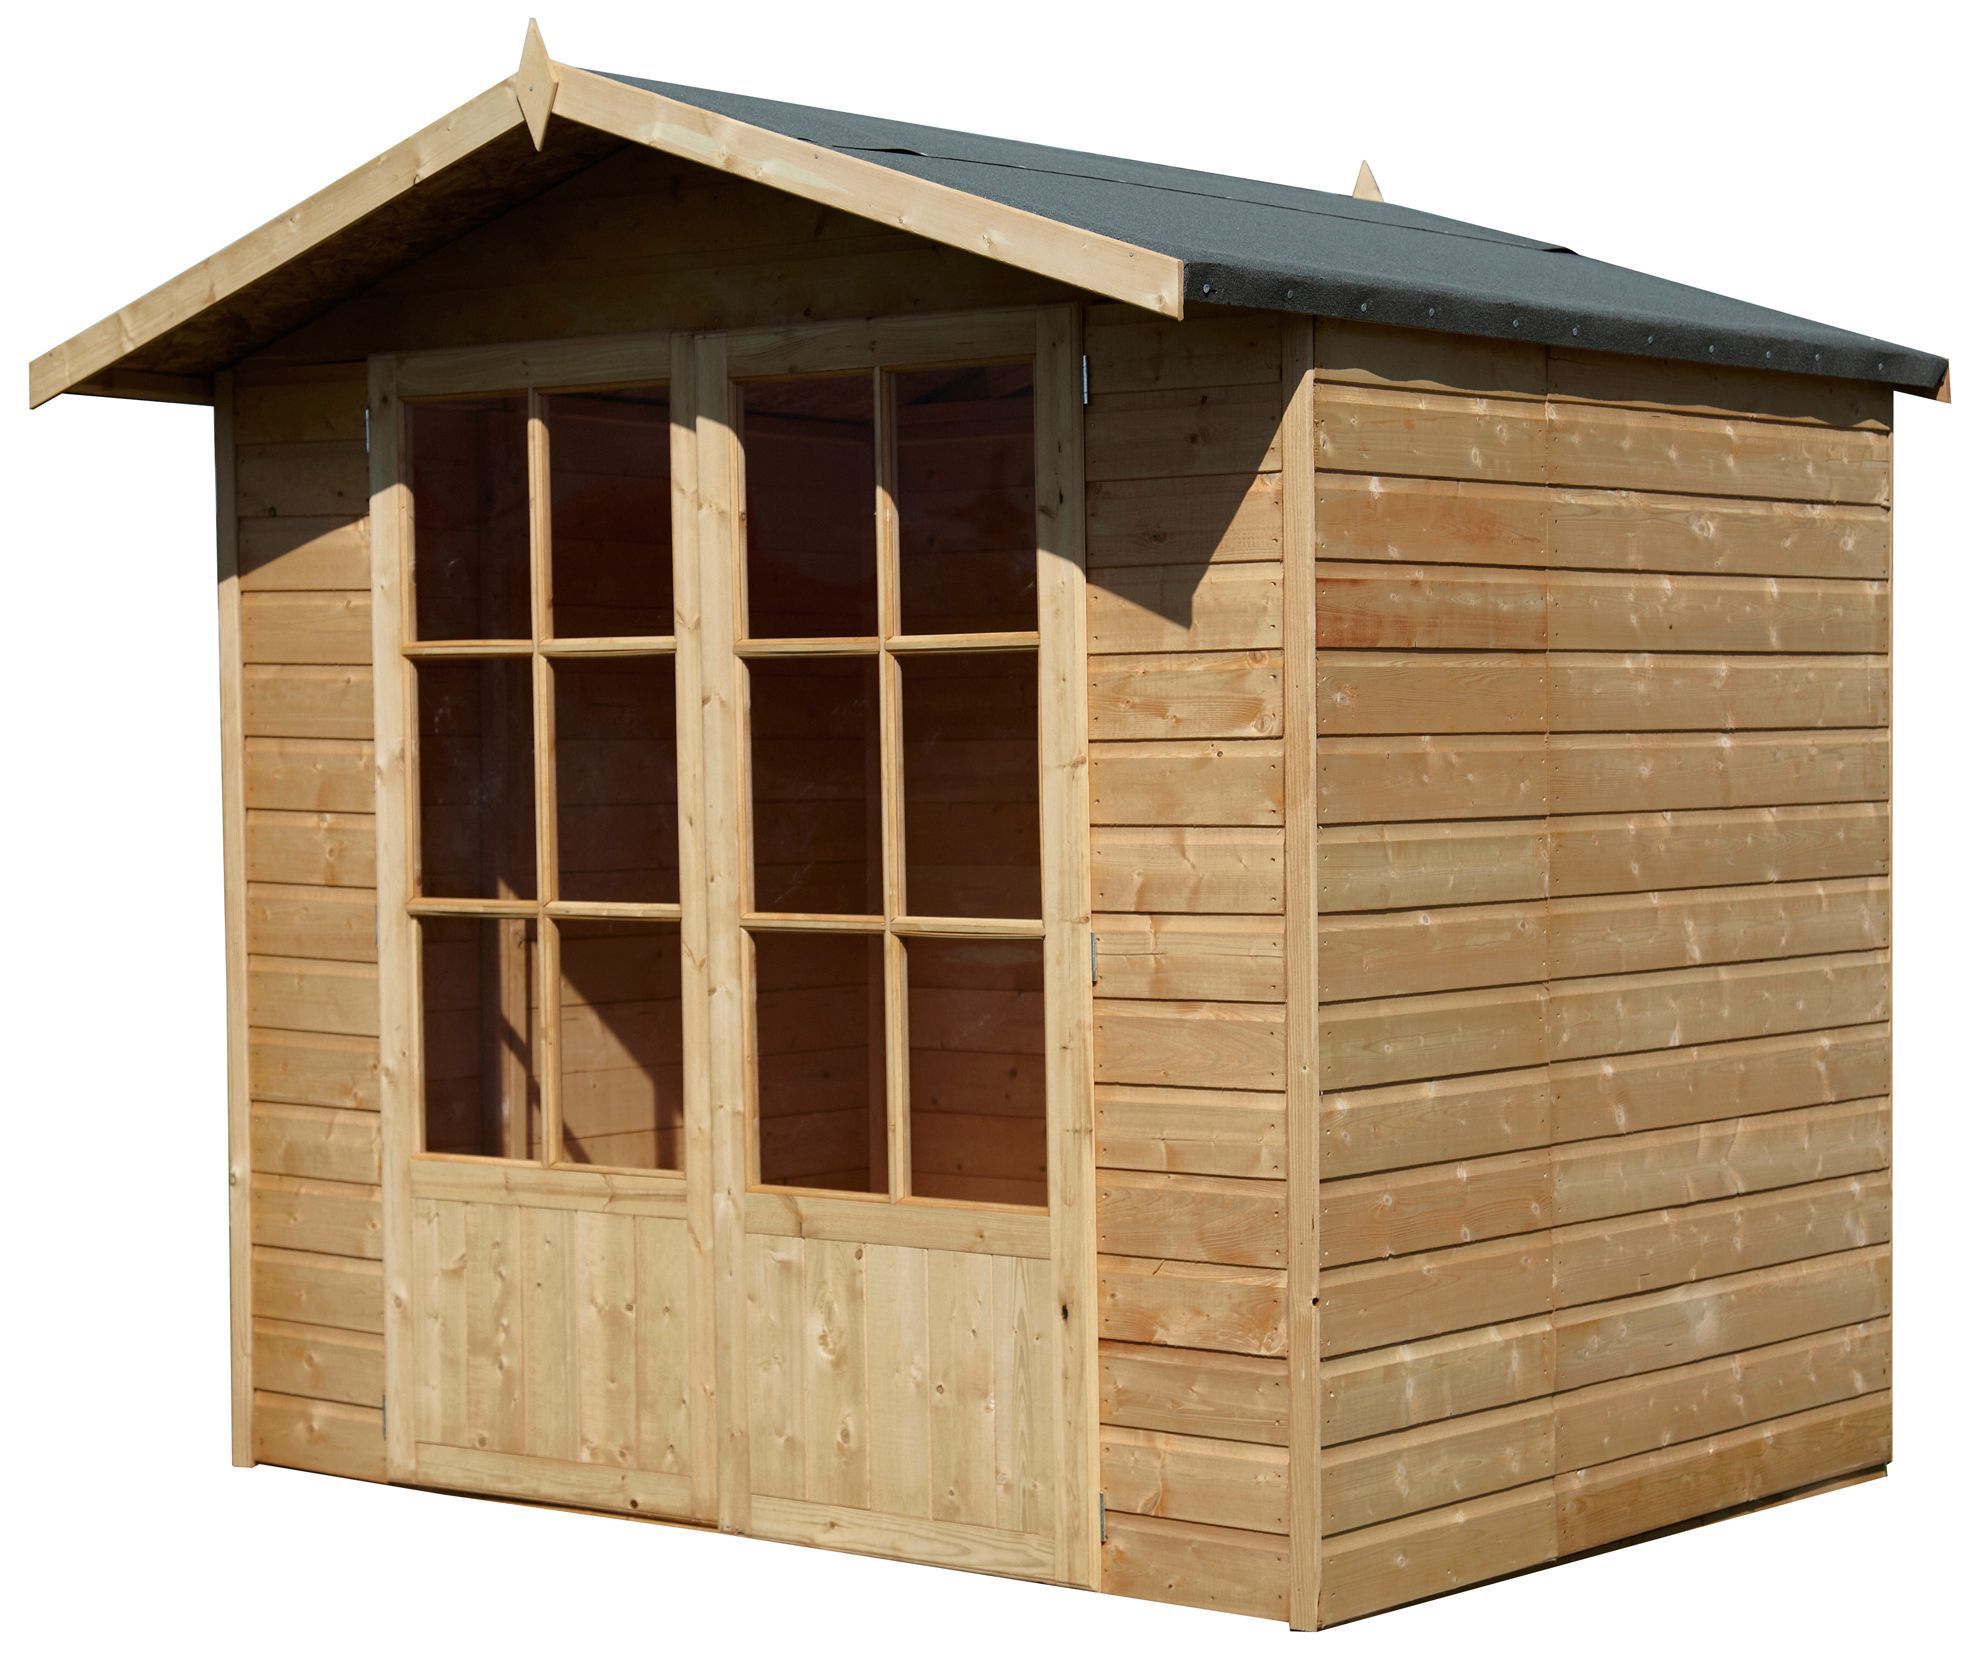 Shire Lumley 7x5 Apex Shiplap Wooden Summer house - Assembly service included